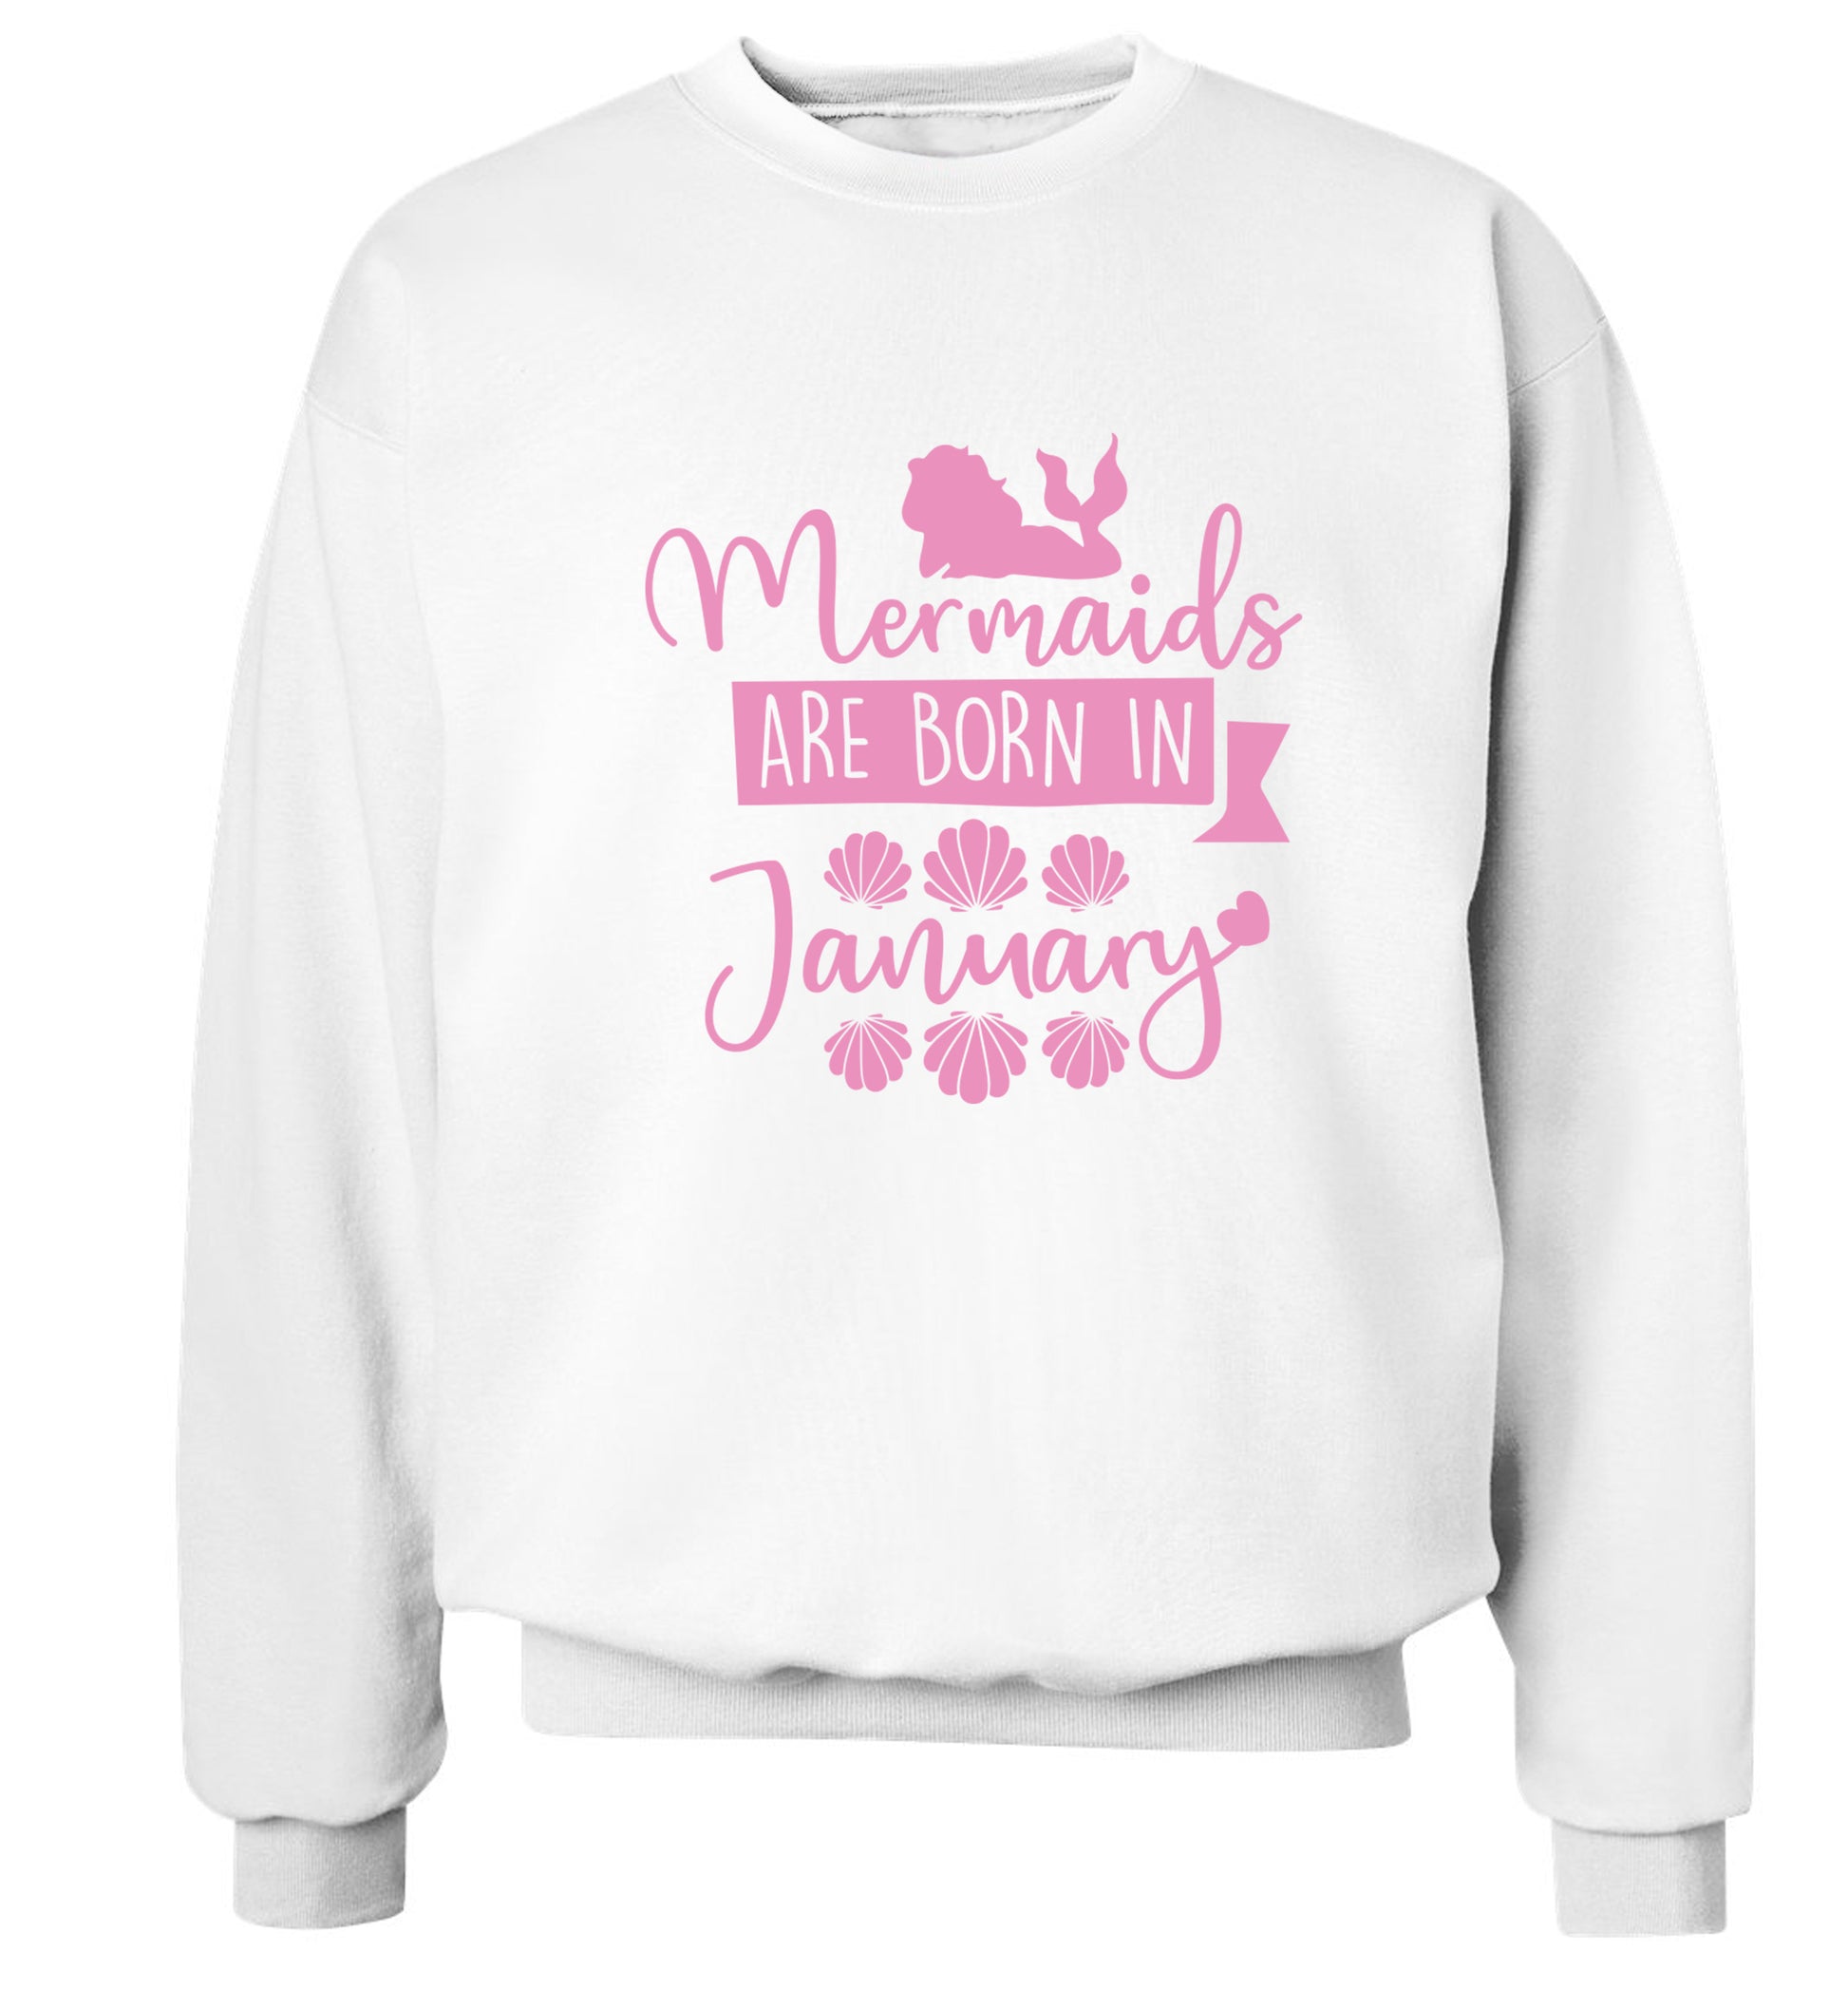 Mermaids are born in January Adult's unisex white Sweater 2XL